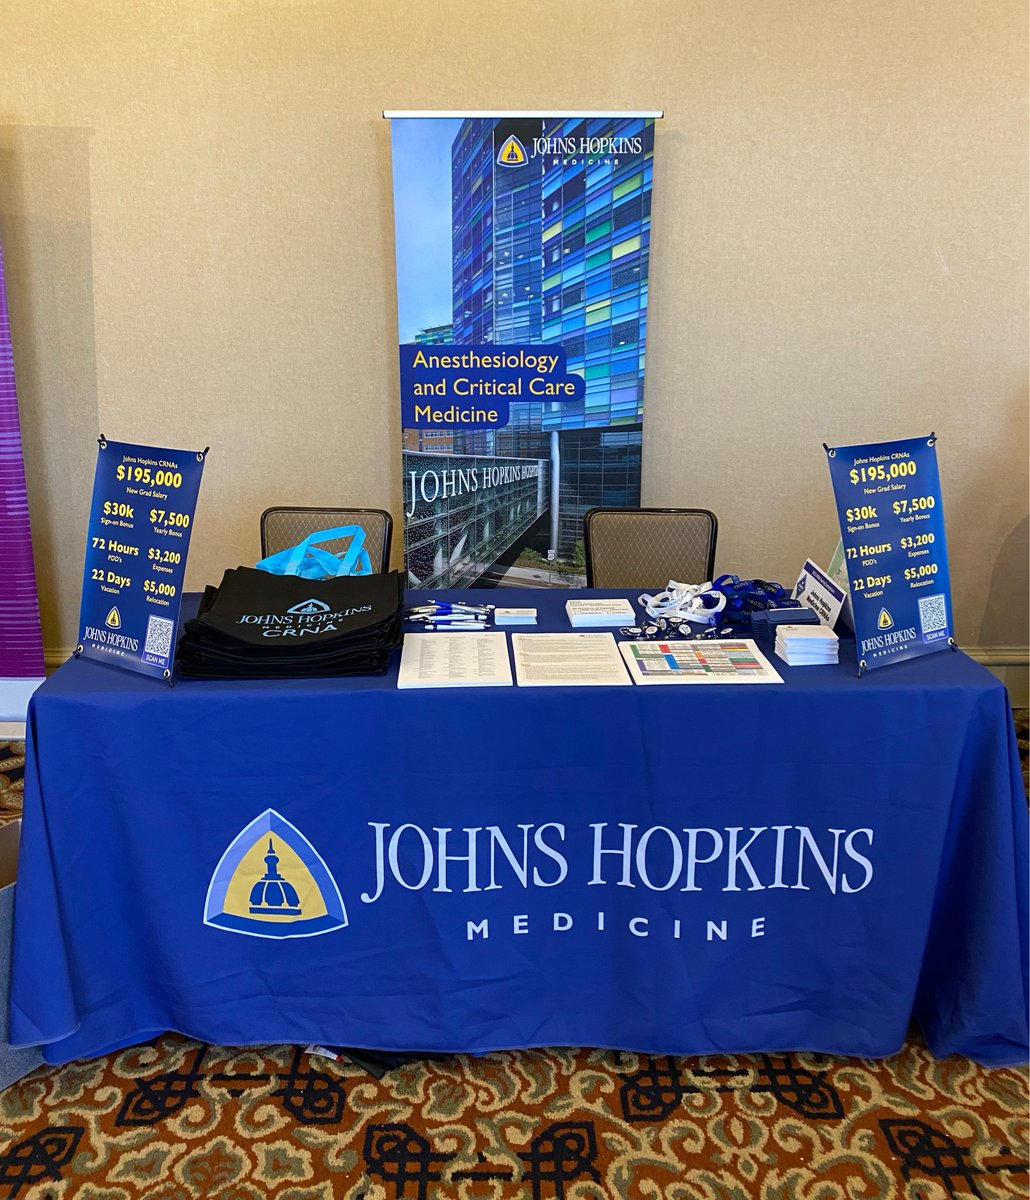 Recruiting for John’s Hopkins at the Spring PANA meeting in Hershey, PA! Looking forward to meeting new recruits and spend time with our CRNA colleagues 😎